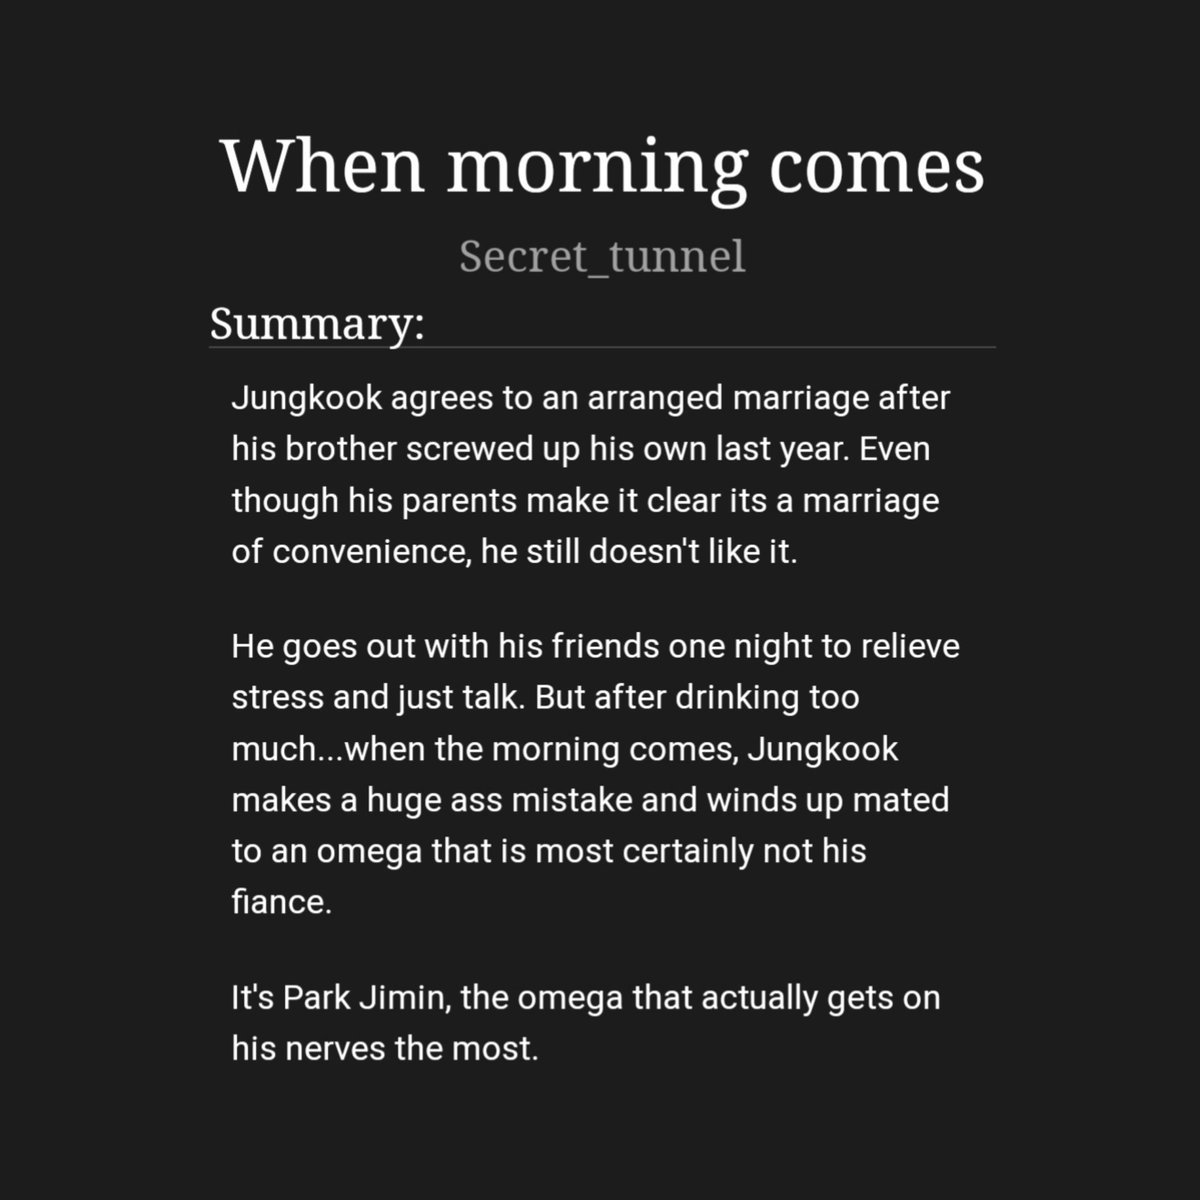 ☾ - When morning comes
by Secret_tunnel
⤷archiveofourown.org/works/39333429

• 151k (JiKook)
• ABO - Modern Setting
• Enemies to Lover's
• Alpha Jk, Omega Jm 
• Accidental mating - Sort of like an arranged marriage 
• One night stand, Domestic Fluff, Established Relationship